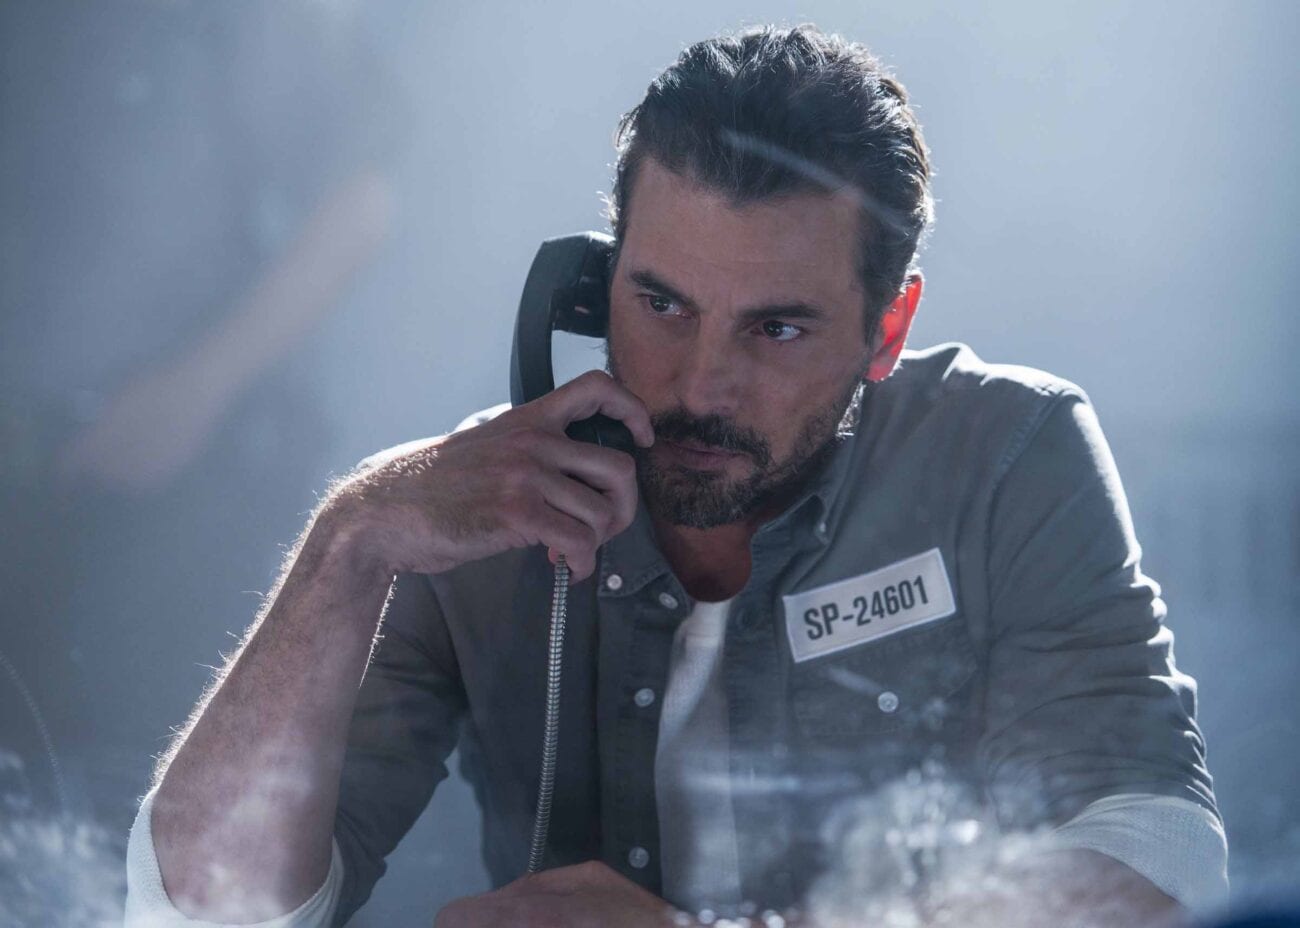 When 'Riverdale' returns for season 5, two parents will bid adieu to the show. But Skeet Ulrich is opening up about why he's leaving FP Jones behind.